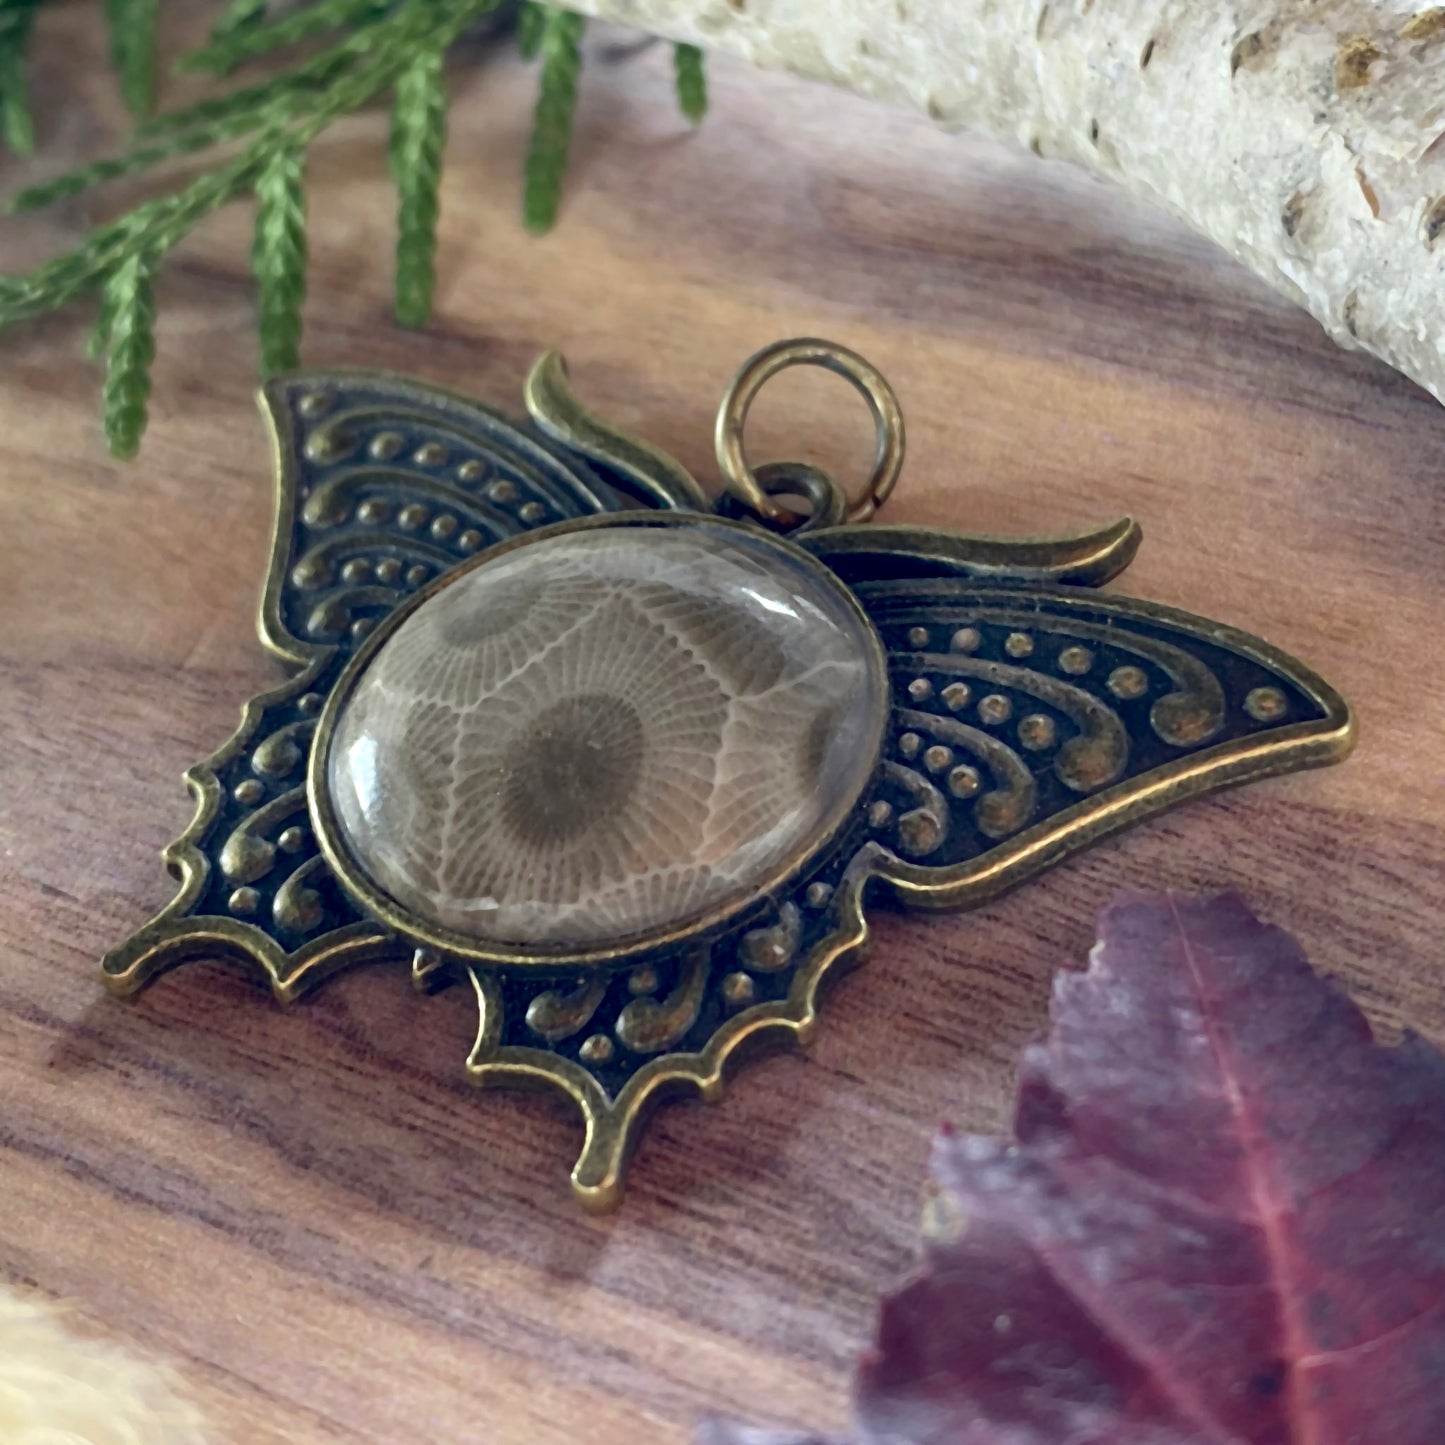 Petoskey Stone Butterfly Pendant Front View III - Stone Treasures by the Lake